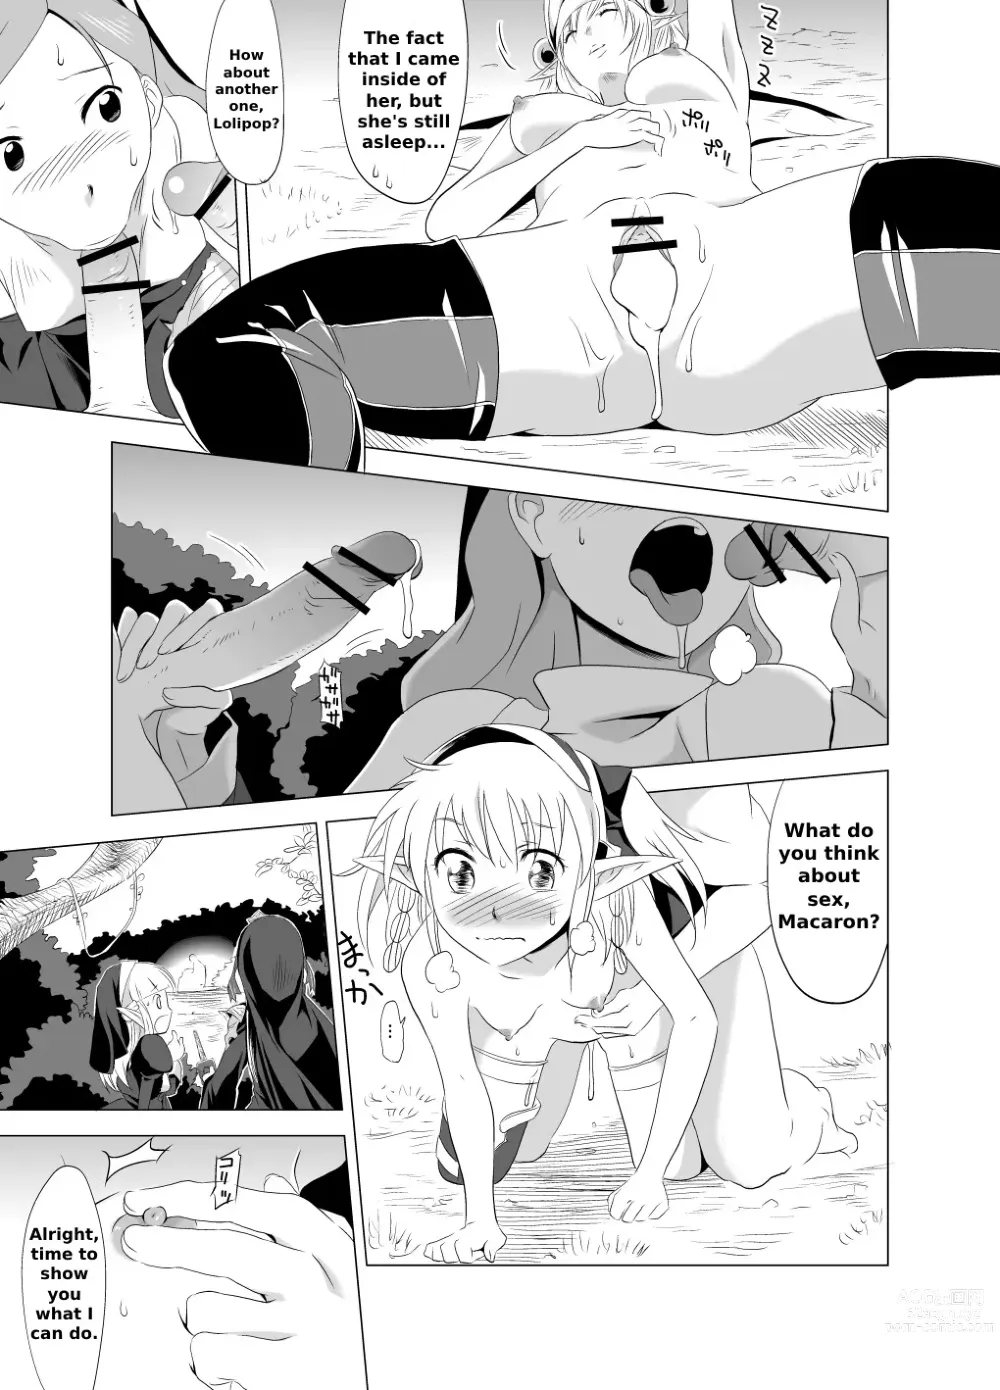 Page 7 of doujinshi 2nd RIDE -Battle Sister crisiS-